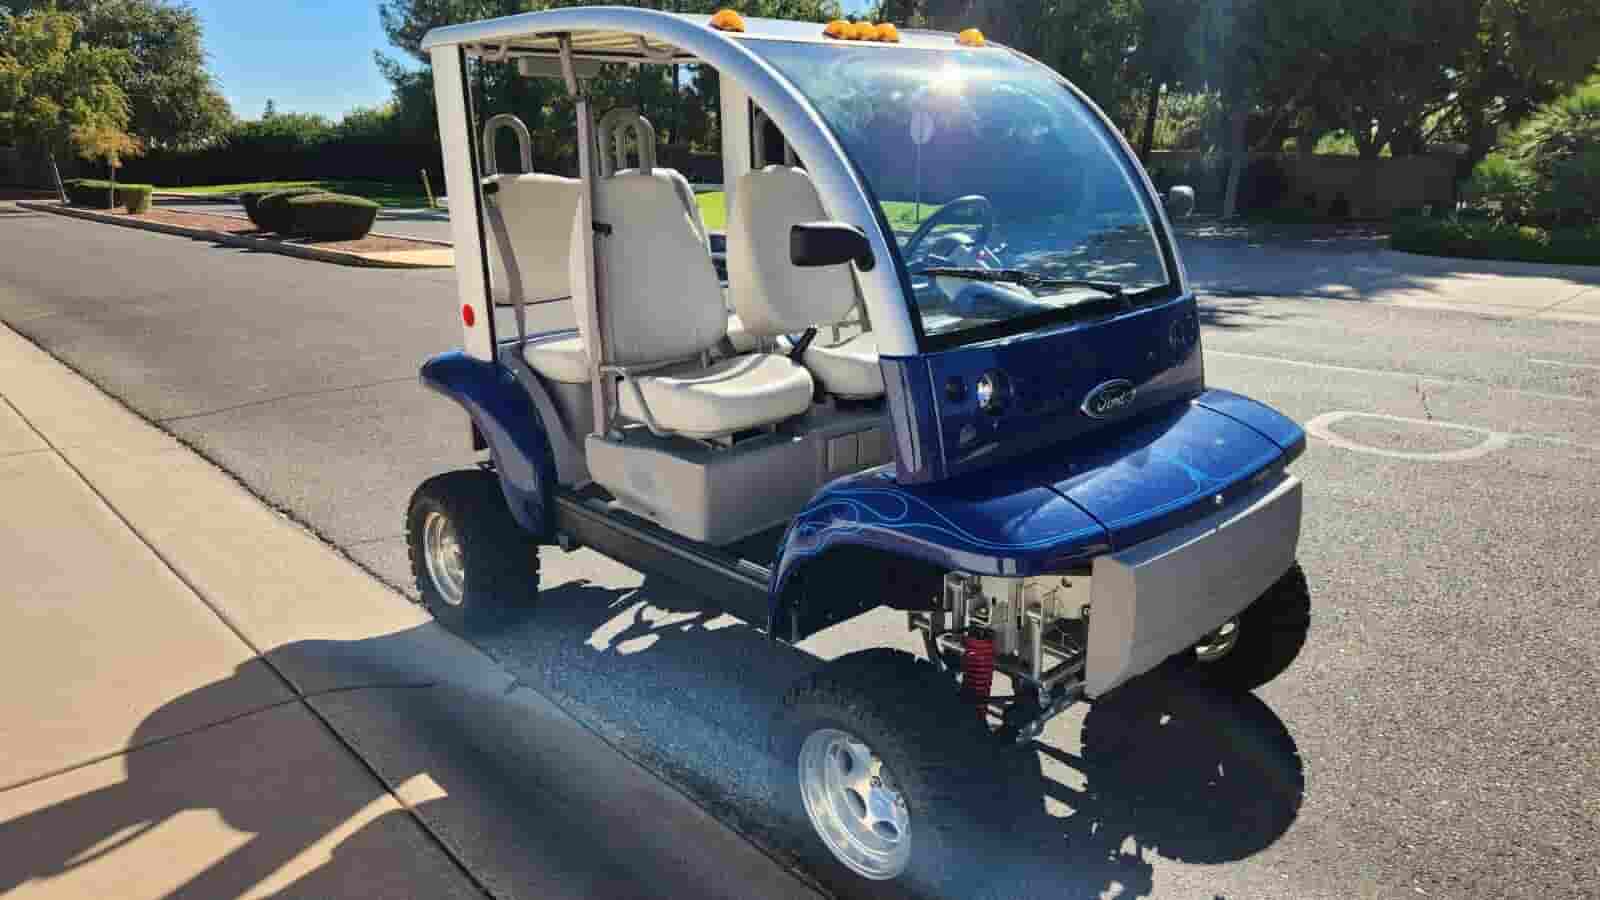 RARE LIFTED FORD THINK, 2002, STREET LEGAL, ELECTRIC GOLF CART